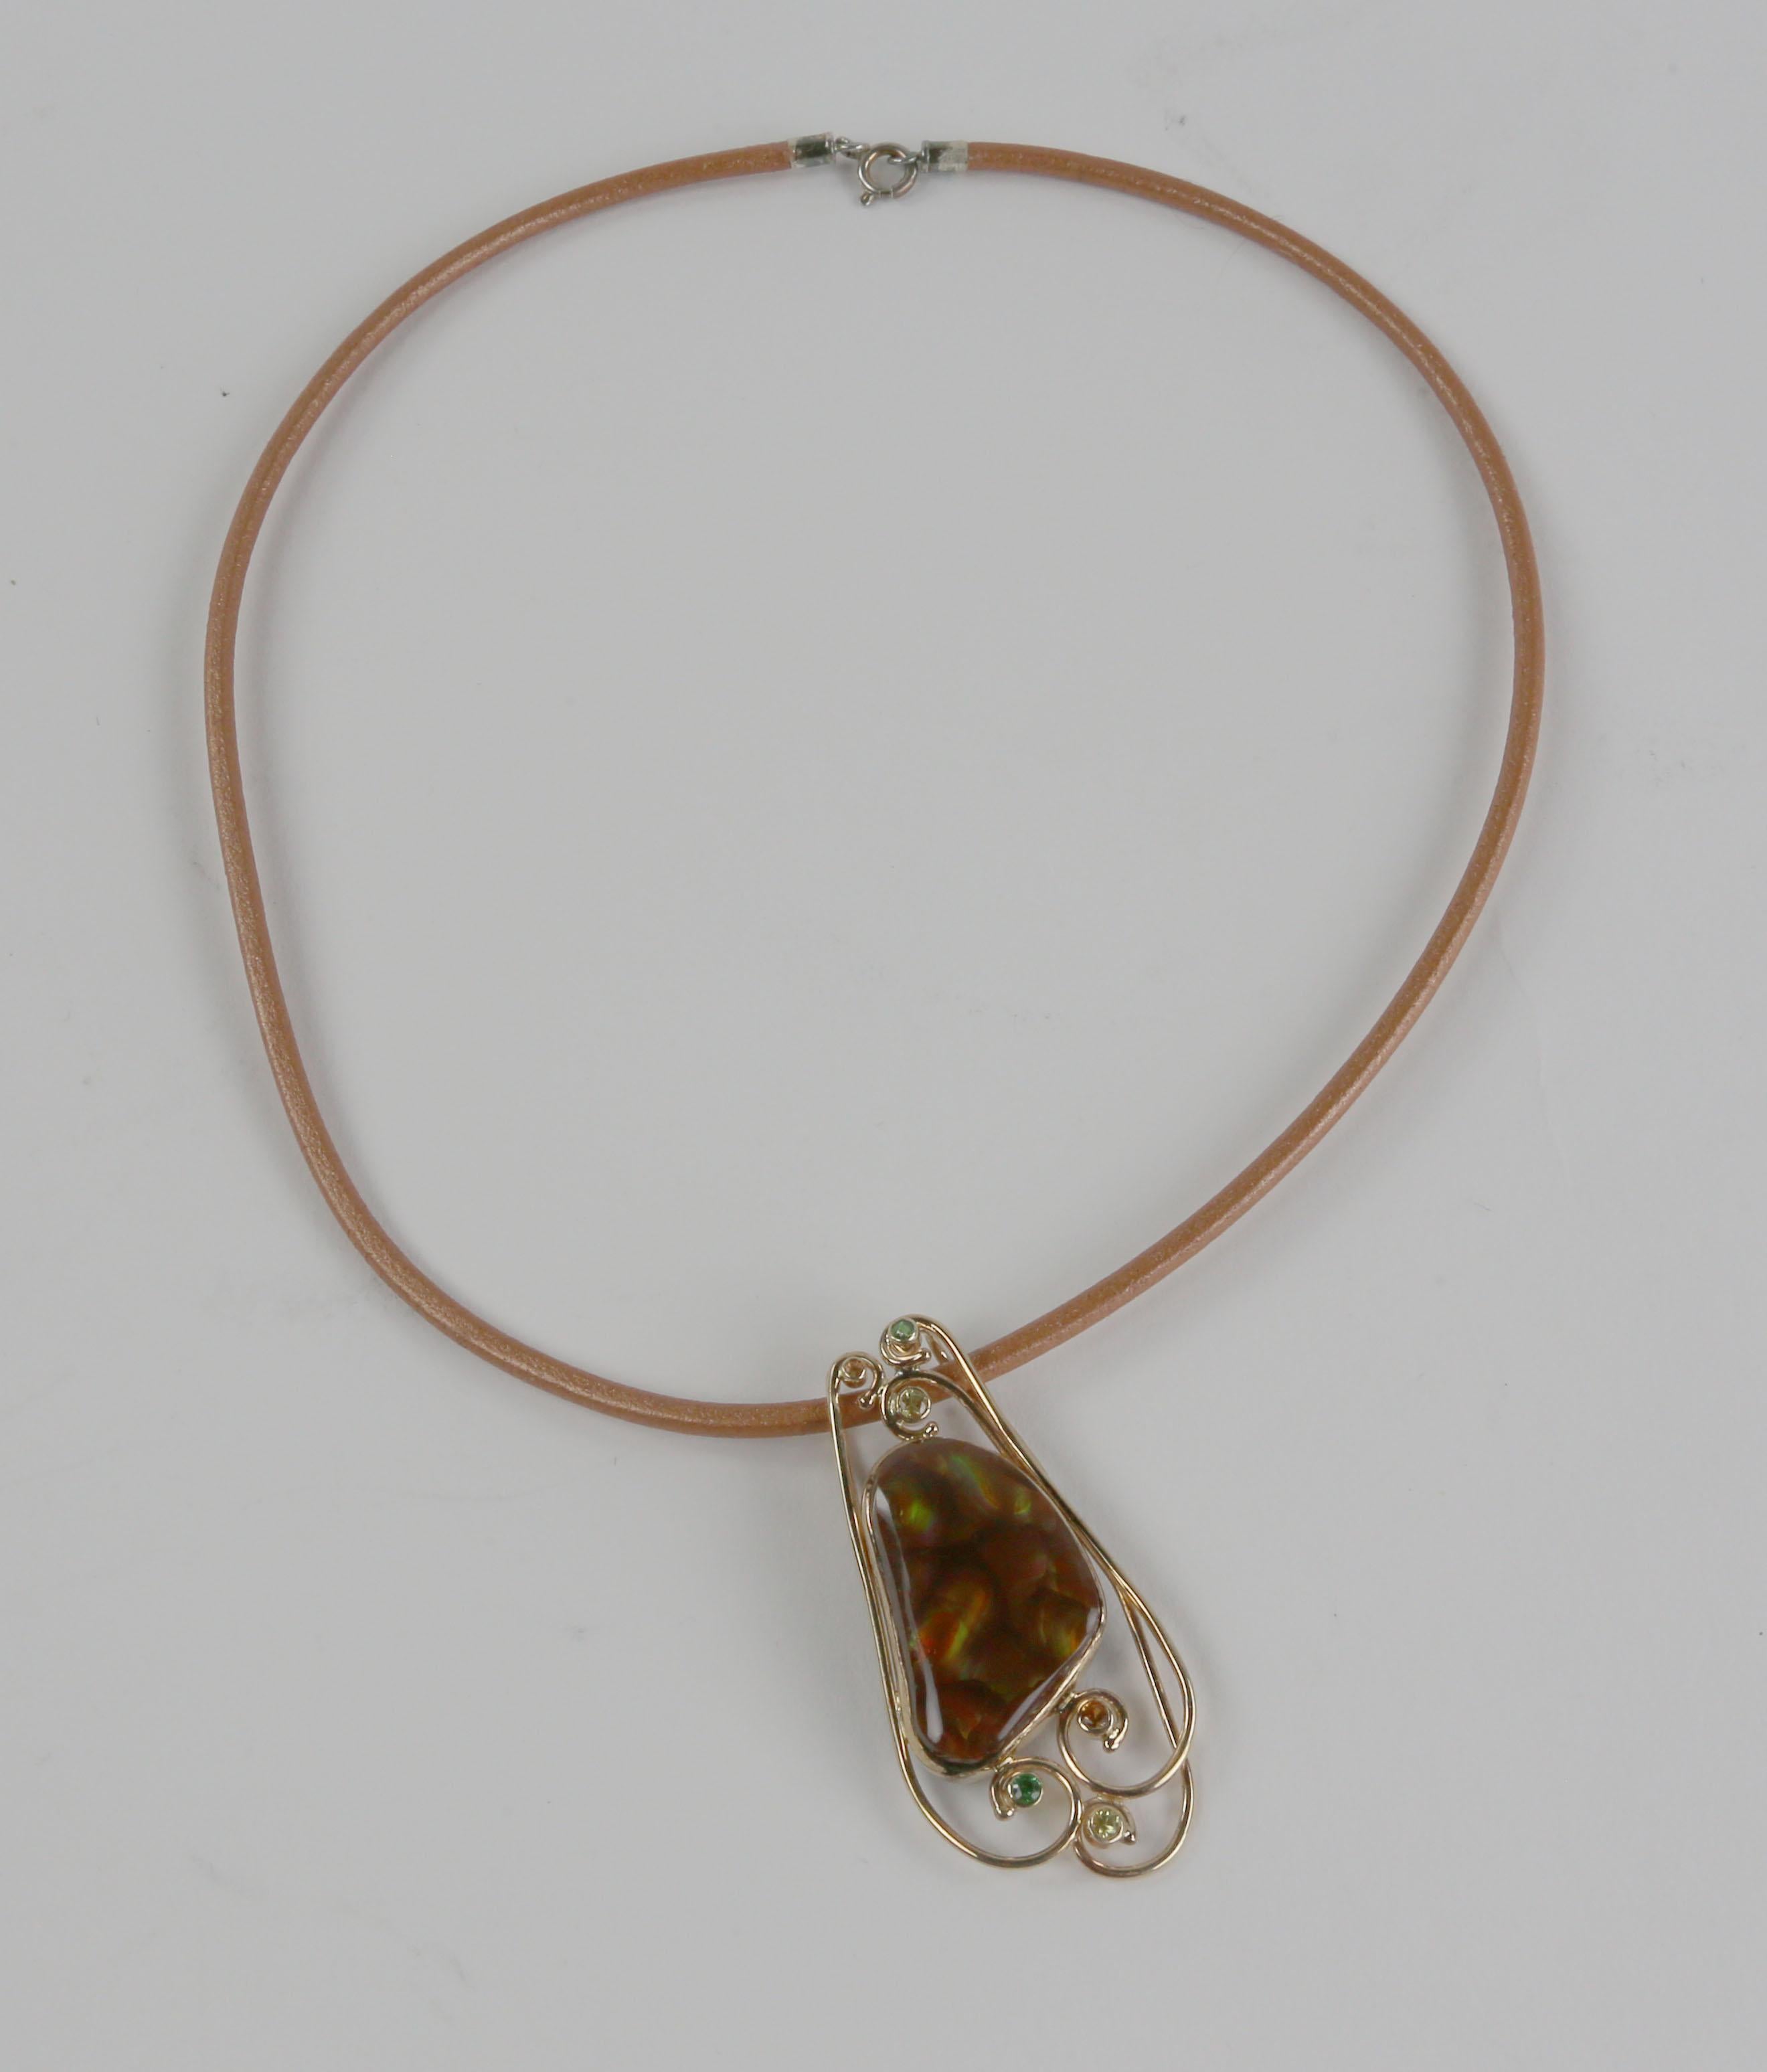 Stylish and Subtlety Beautiful Pendant Necklace boasts an Awesome Fire Agate Gem Stone and enhanced with Sapphire and Tsavorite Gem Stones mounted in a Hand crafted 18K yellow Gold setting. The Sterling Silver hand crafted back plate is marked,